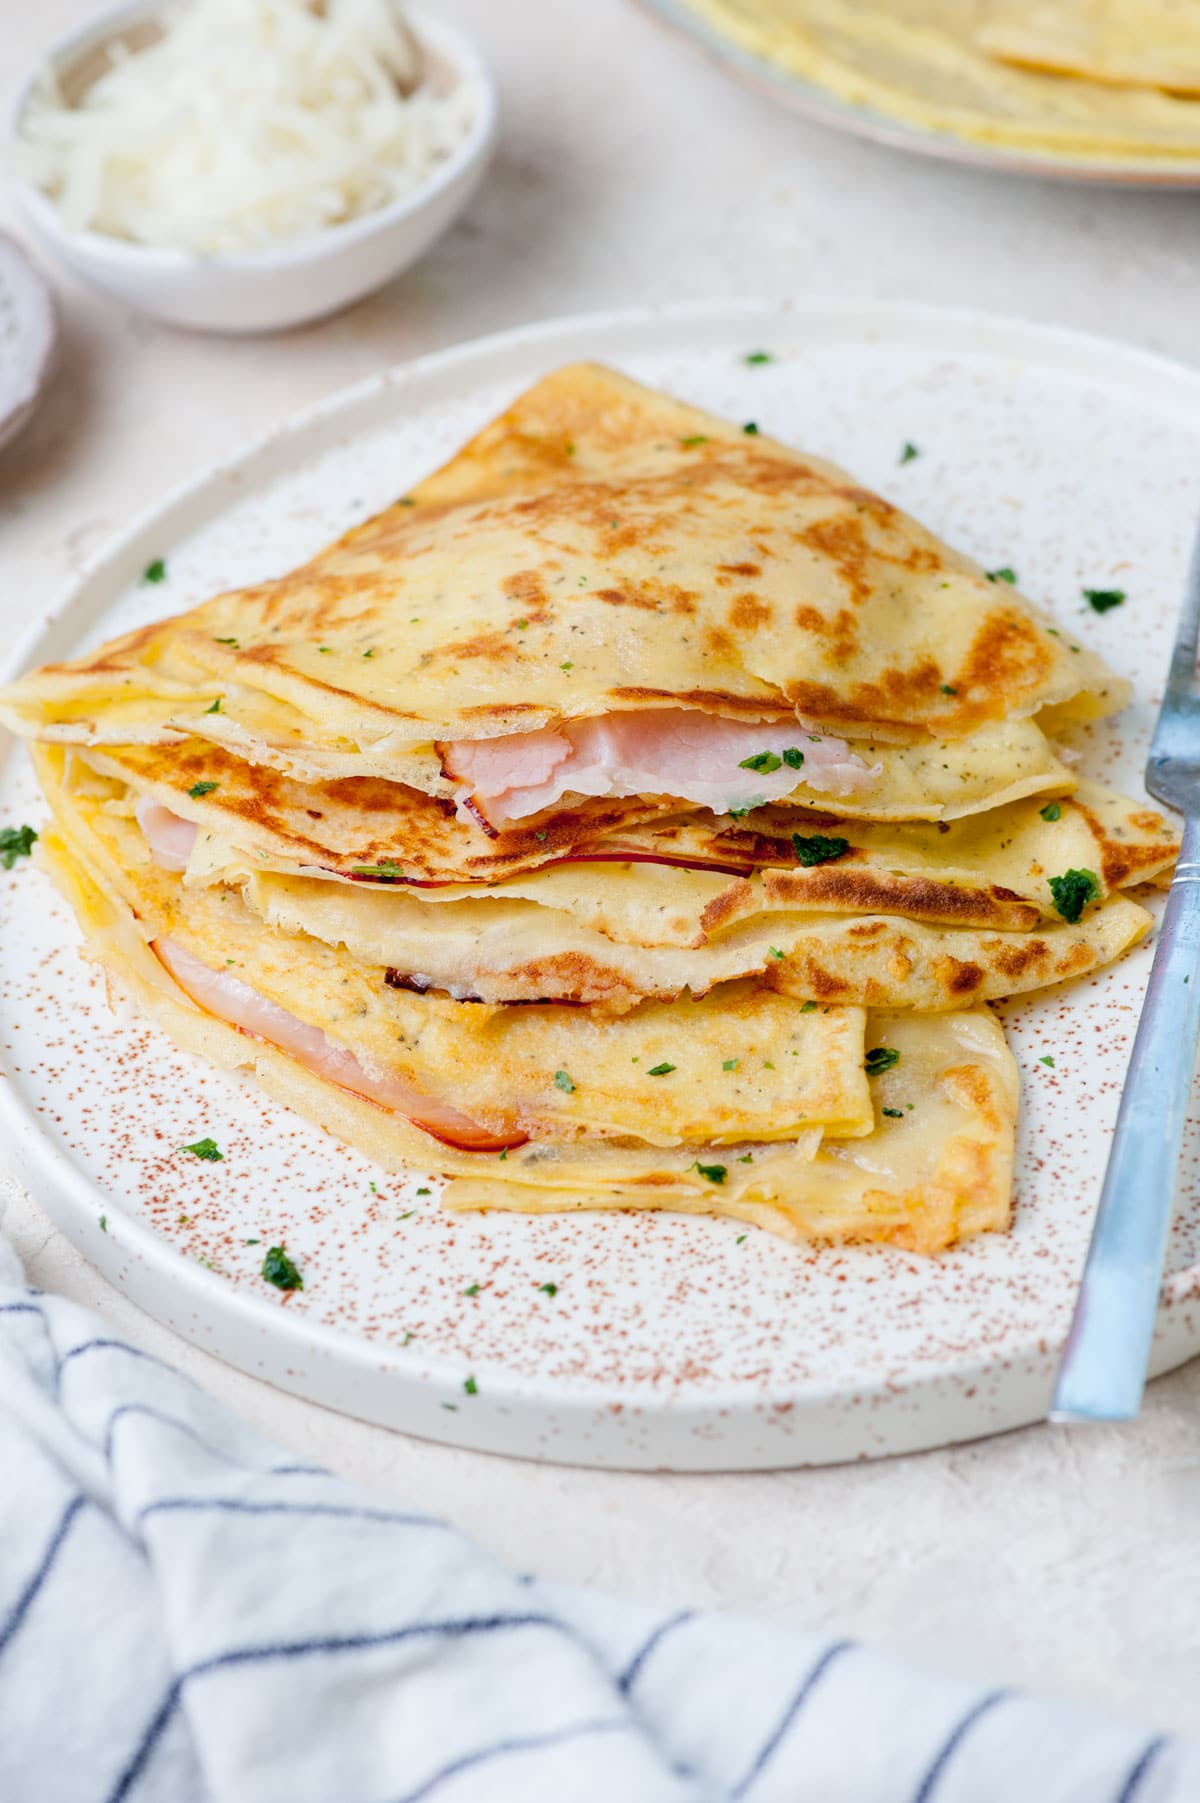 Savory crepes with cheese, ham, and eggs on a white plate.